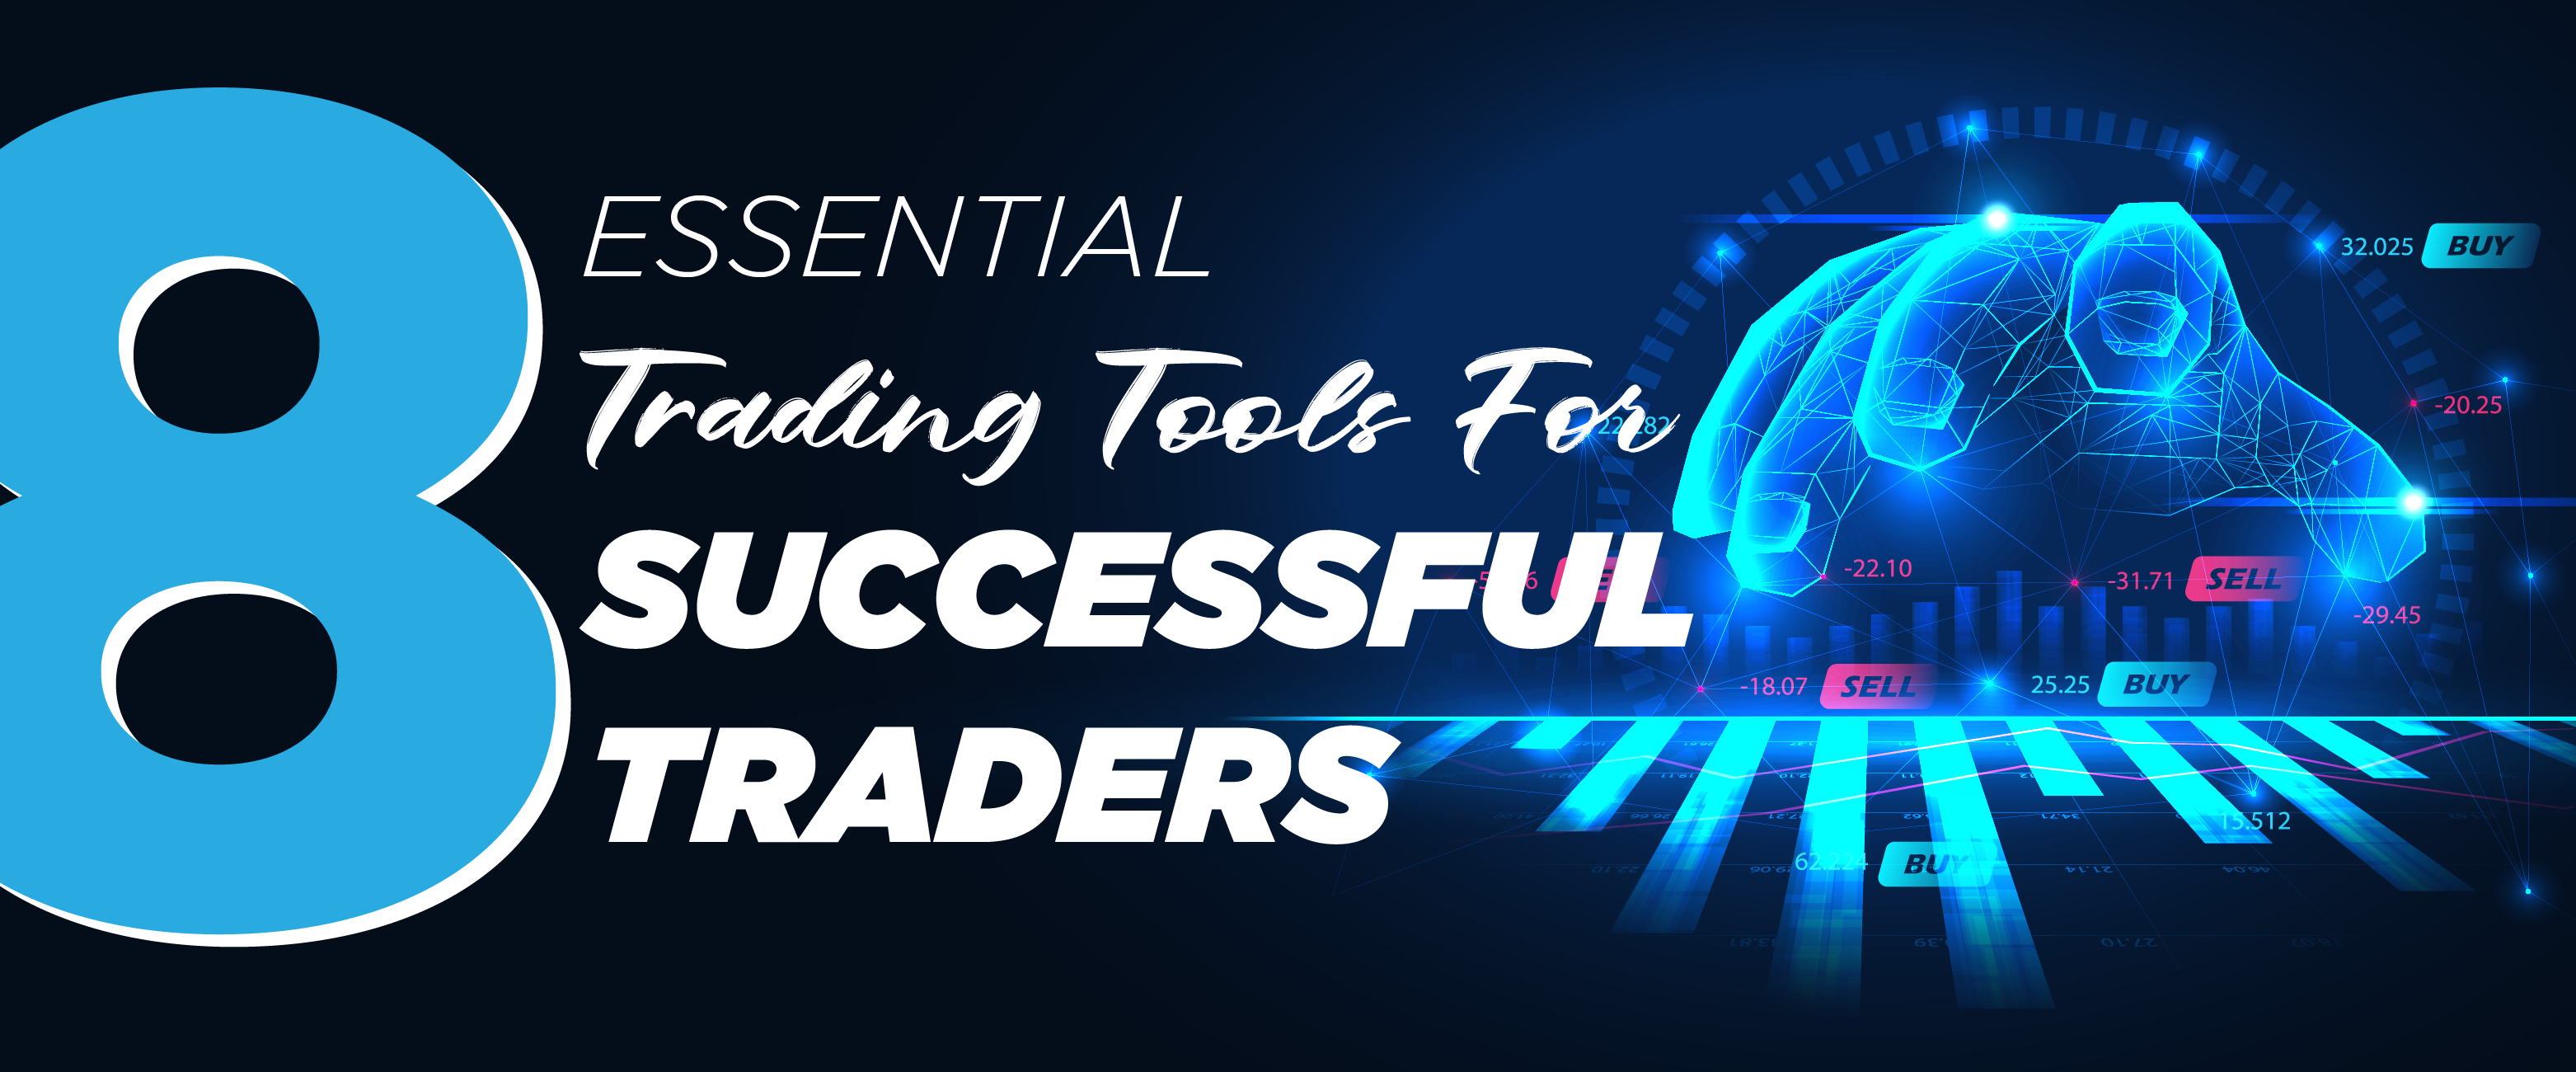 Top 8 Essential Trading Tools for Successful Traders